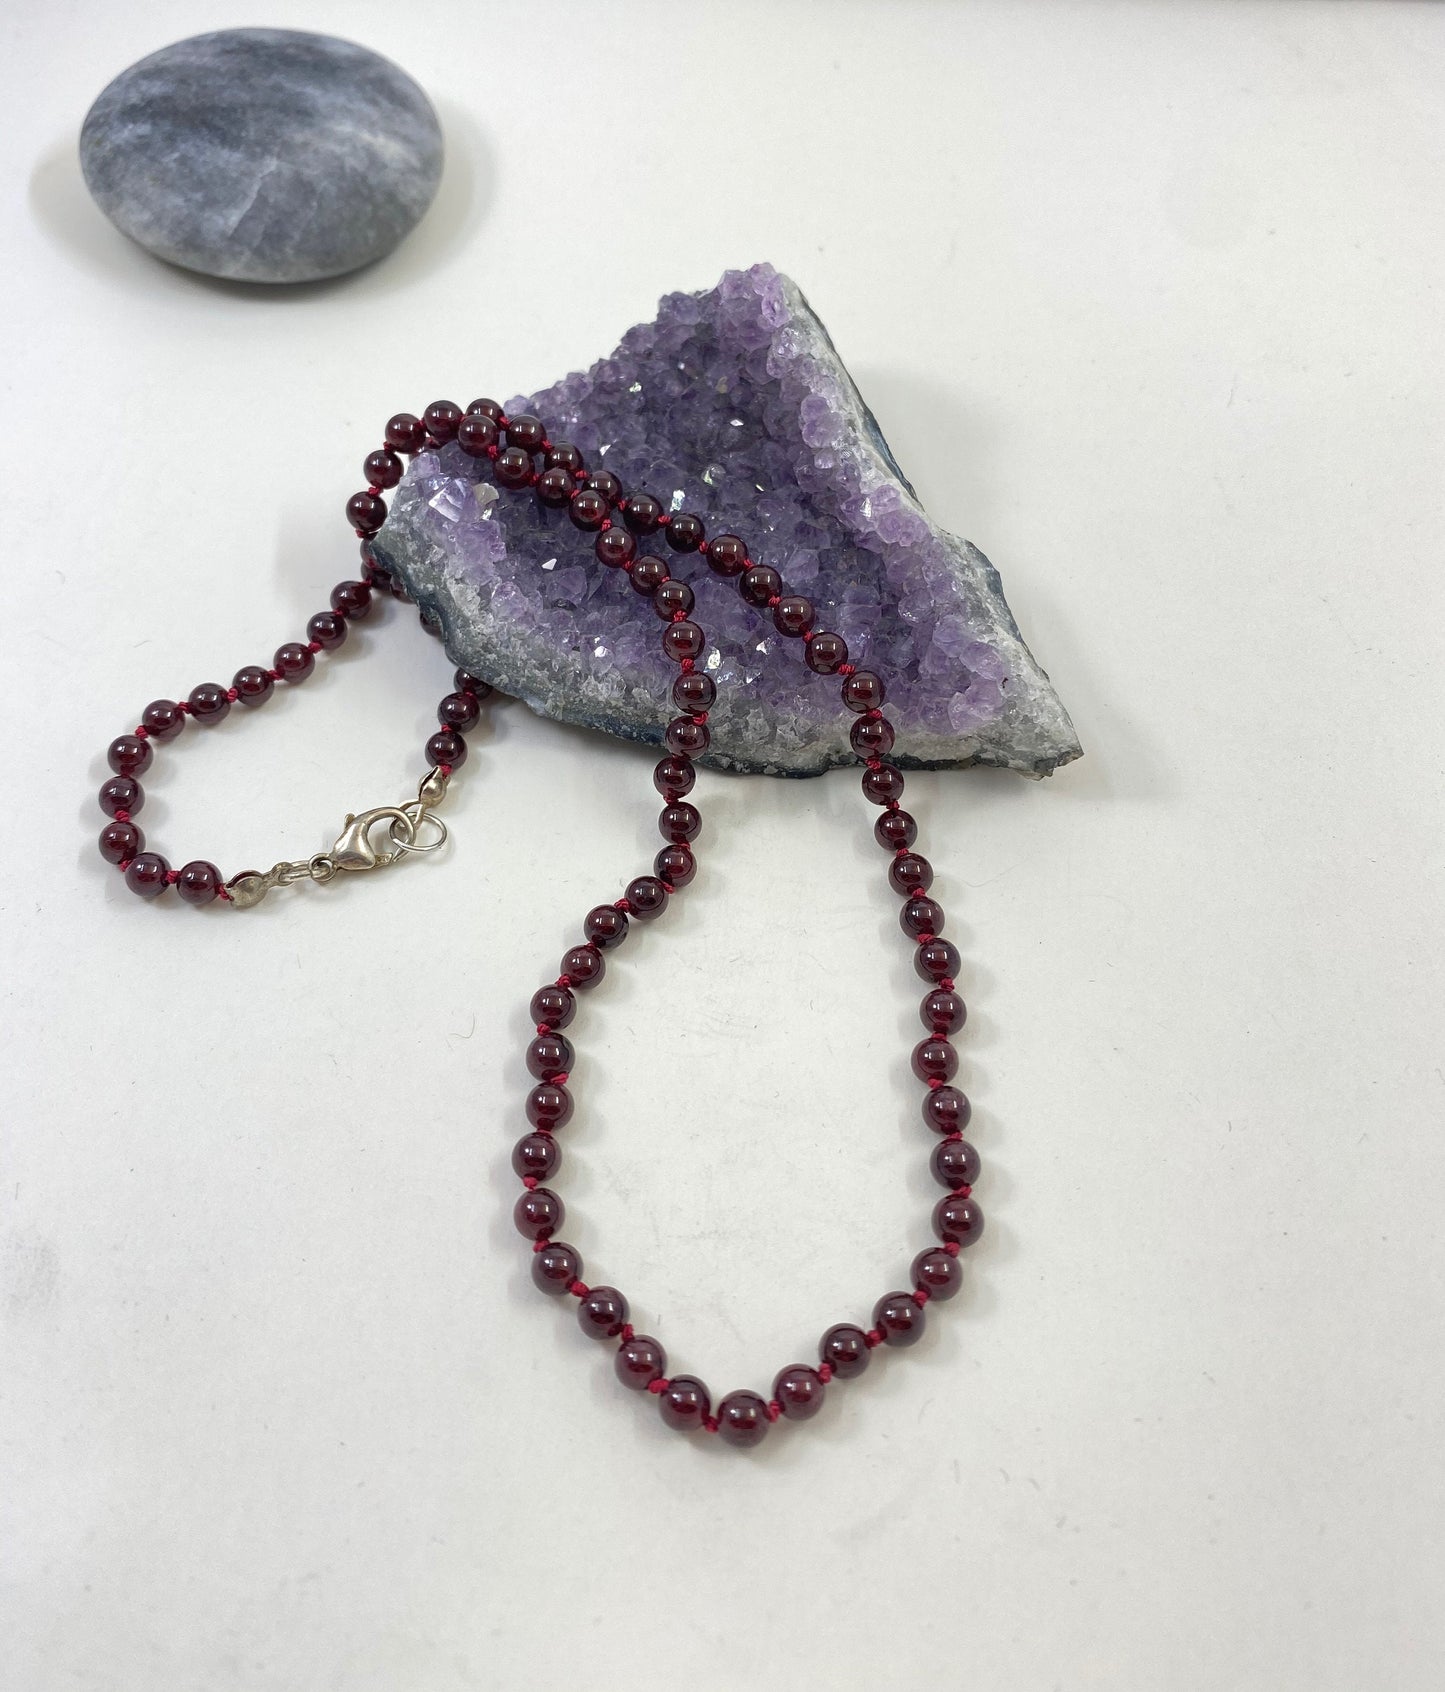 Exquisite garnet beaded and hand knotted necklace. Finished with a quality sterling silver lobster clasp.